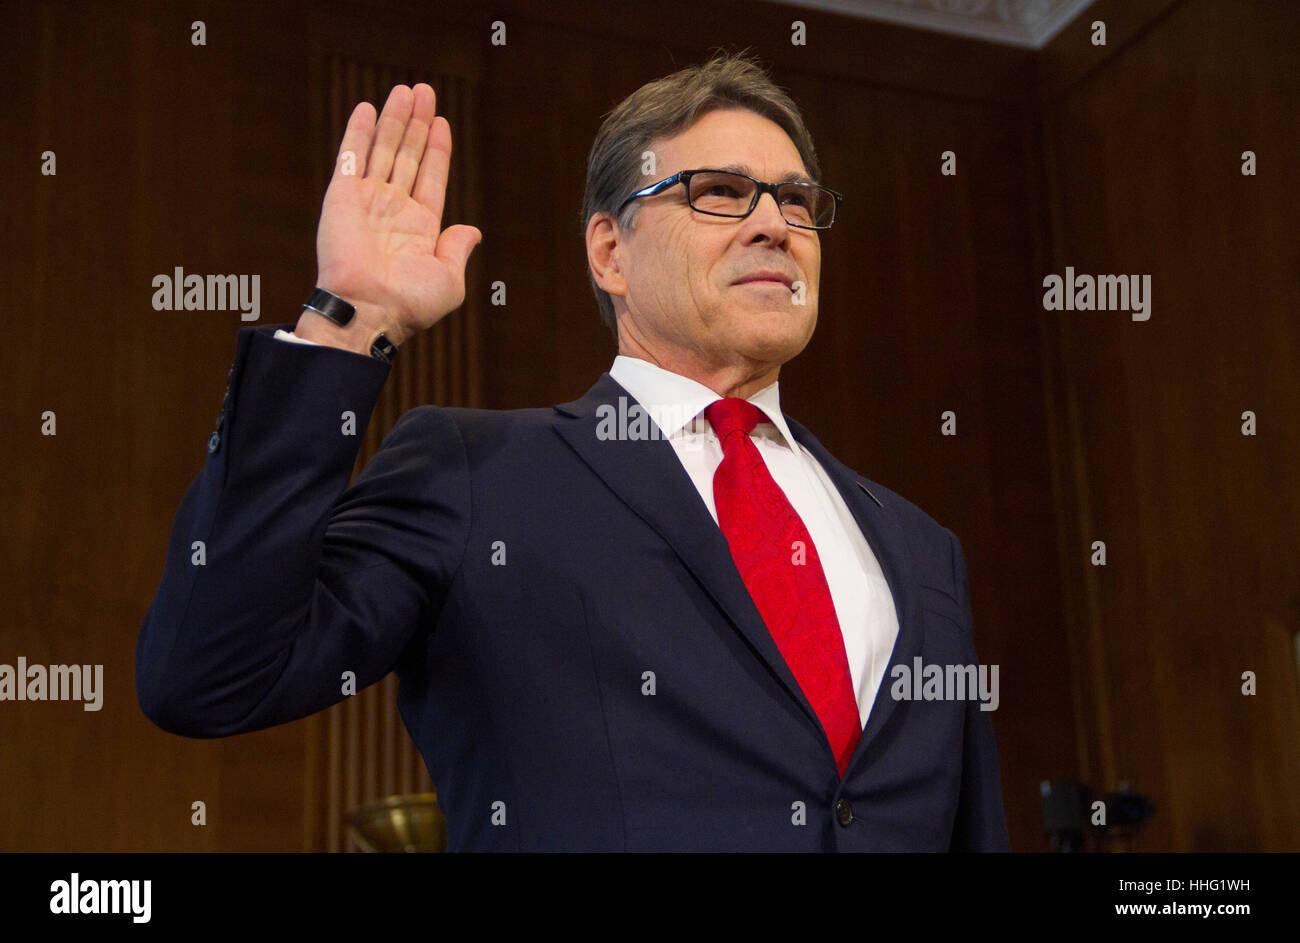 Washington, USA. 19th Jan, 2017. Former Texas Governor Rick Perry, President-elect Donald Trump's choice as Secretary of Energy, is sworn in at his confirmation hearing before the Senate Committee on Energy and Natural Resources on Capitol Hill January 19, 2017 in Washington, DC. Perry is expected to face questions about his connections to the oil and gas industry. Credit: PixelPro/Alamy Live News Stock Photo